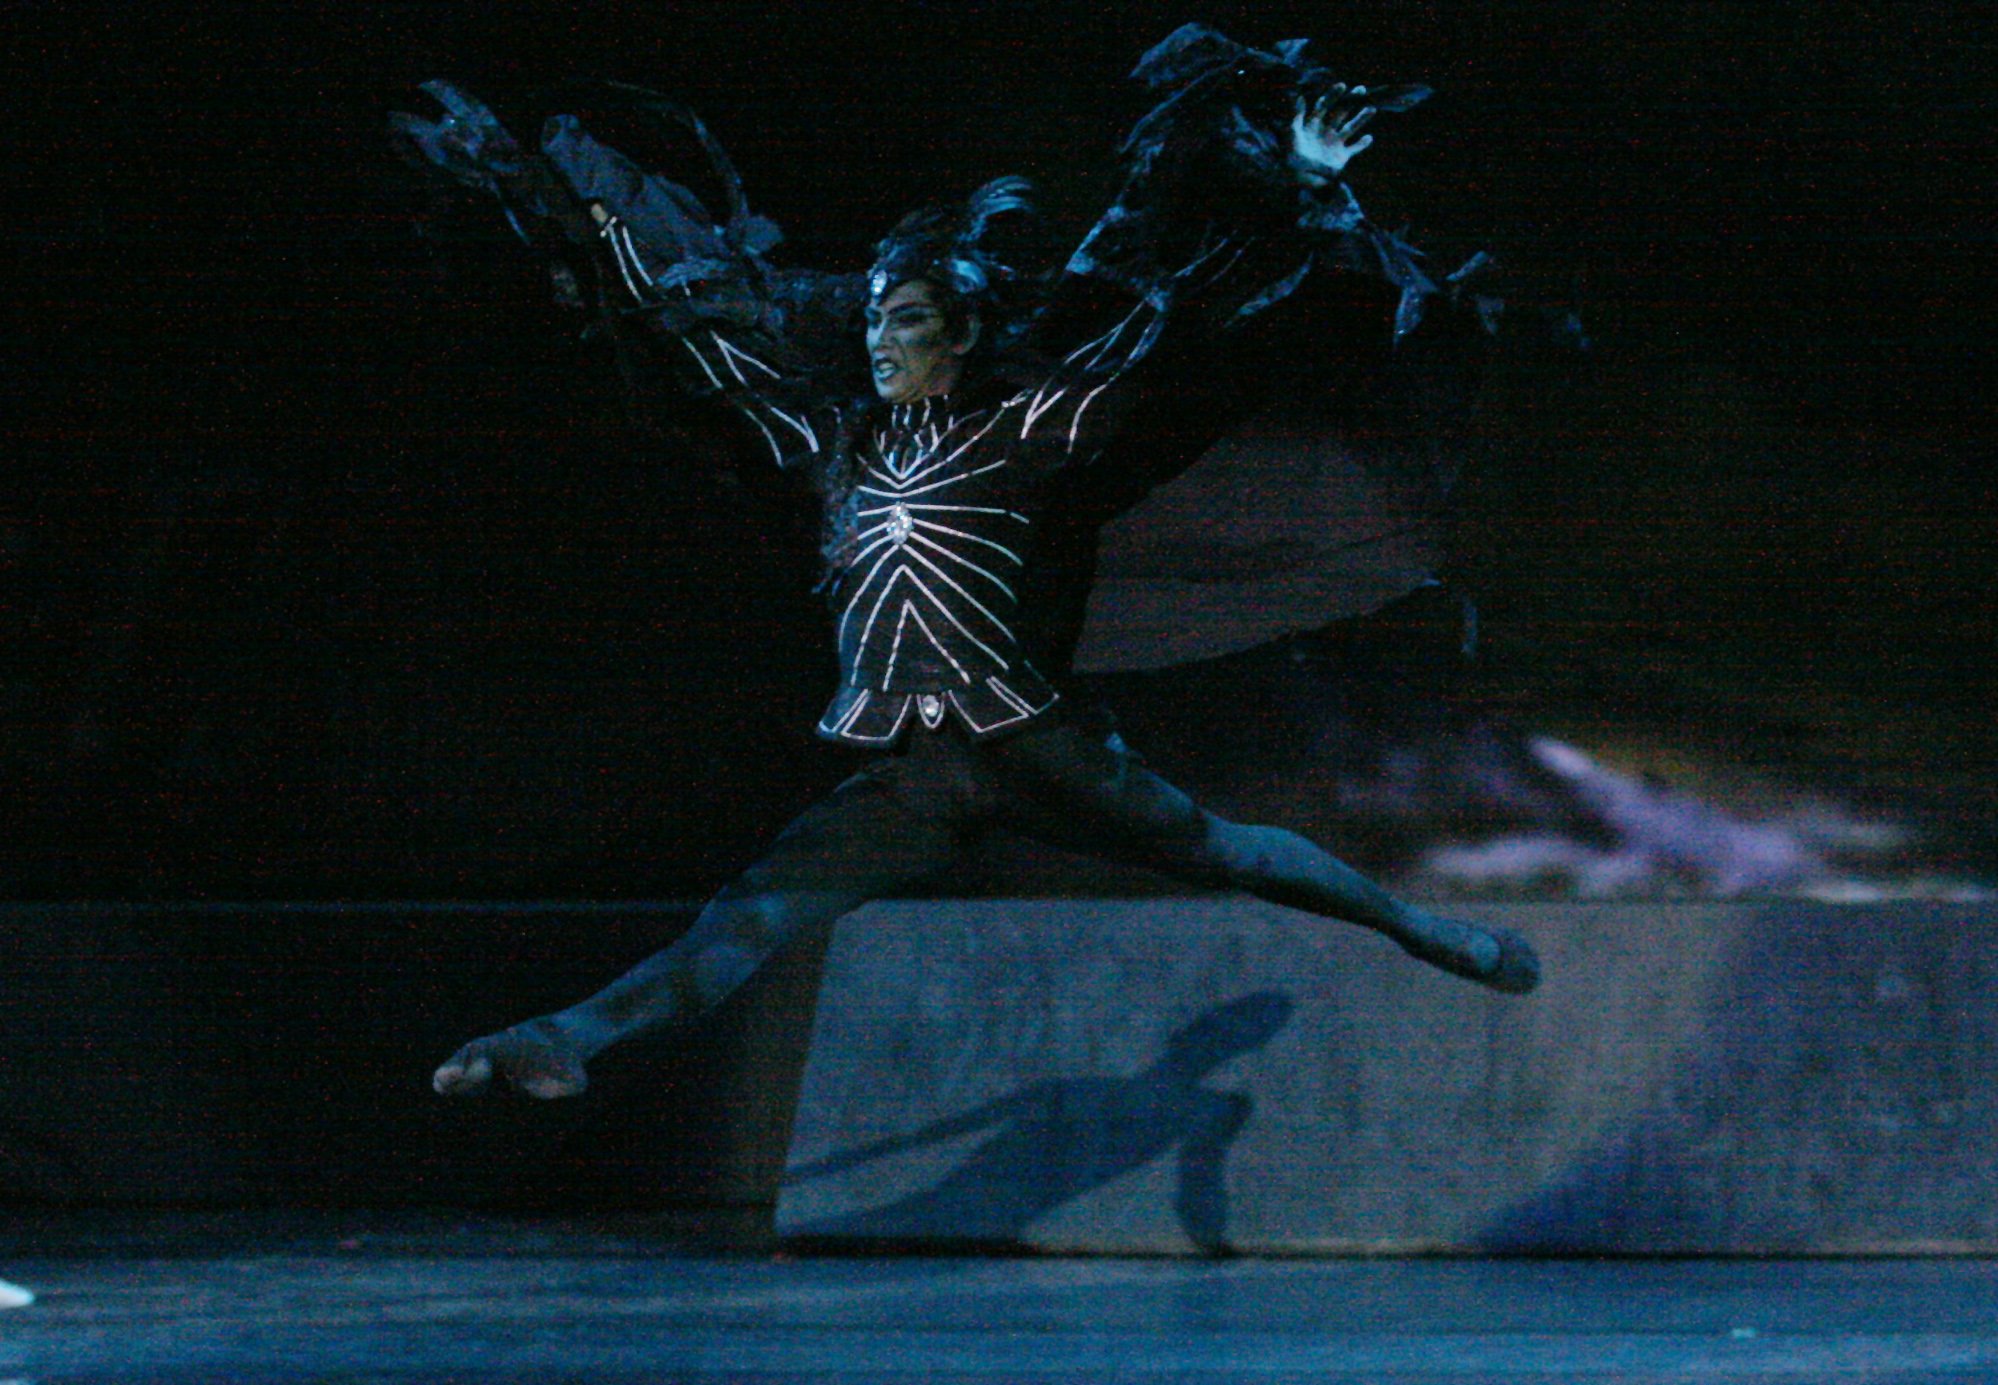    Looming like a predator, the sorcerer Von Rothbart (Nazer Salgado) looks even more menacing in a black outfit topped off by a cloak that reminds one of a vulture, the ultimate bird of prey. Salgado played the villain in the ballet classic  Swan La